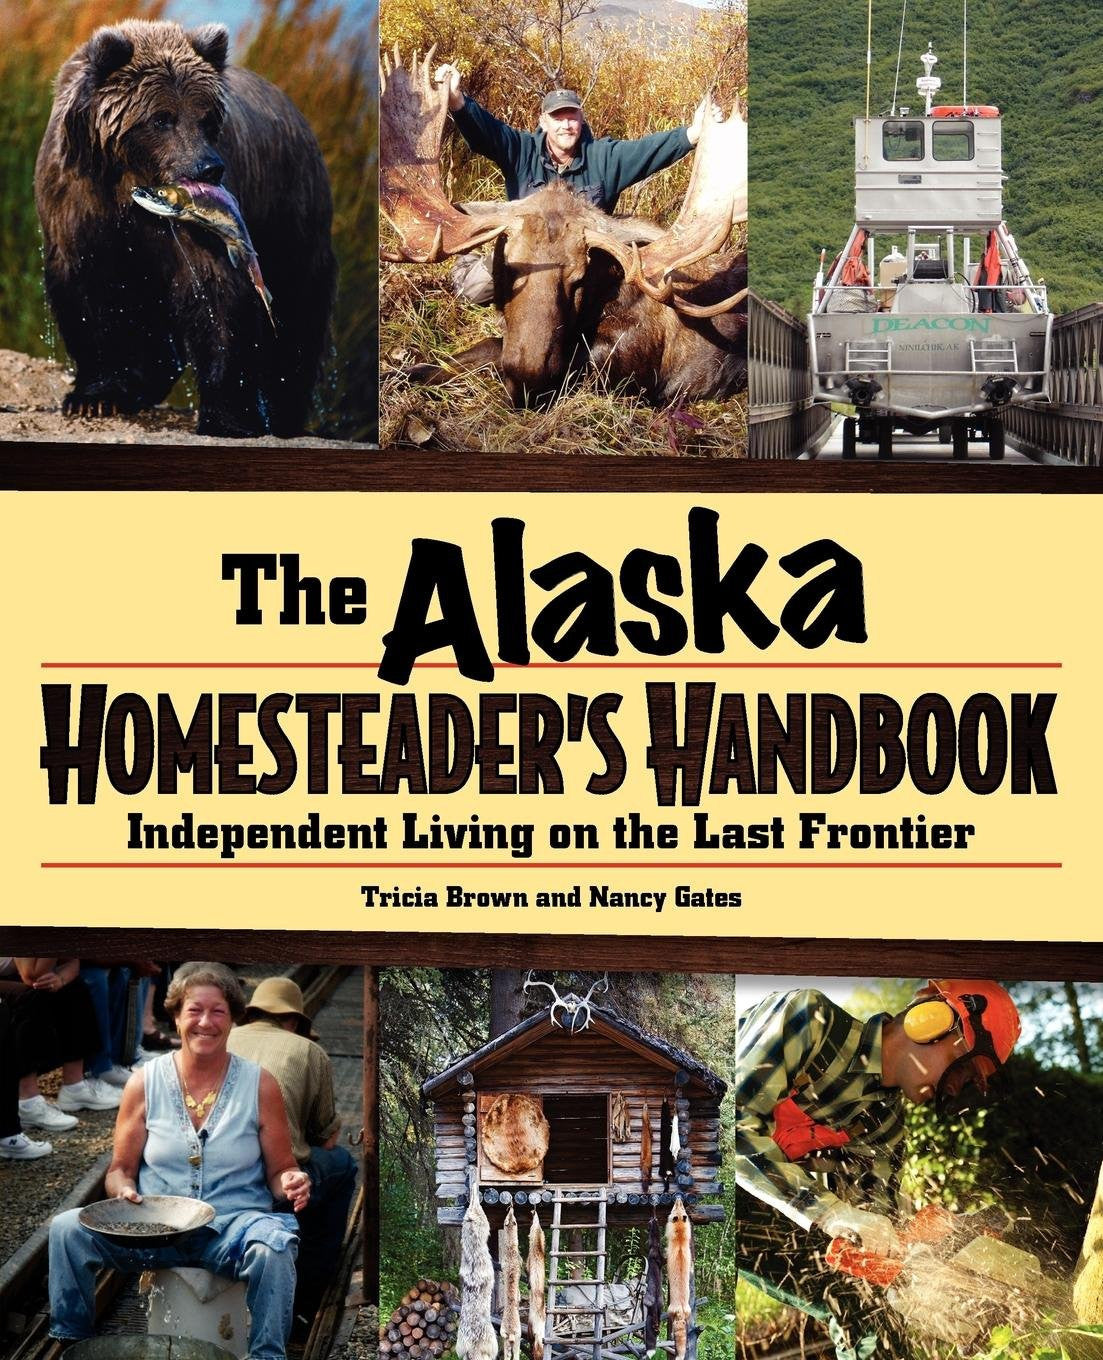 Alaska Homesteader's Handbook: Independent Living on the Last Frontier by Tricia Brown and Nancy Gates